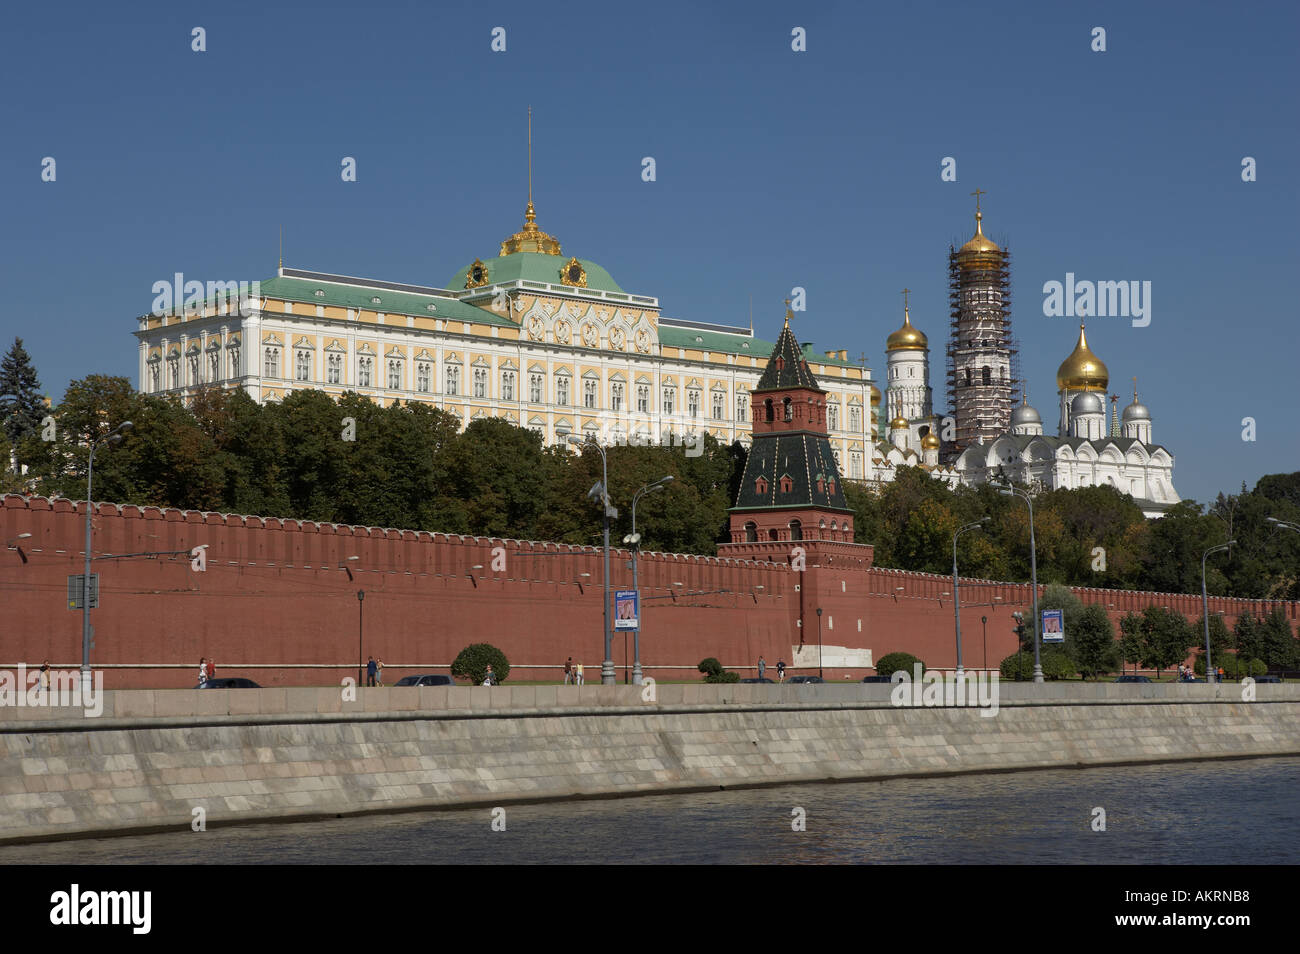 KREMLIN WALL GRAND PALACE ANNUNCIATION CATHEDRAL EMBANKMENT AND RIVER MOSCOW RUSSIA Stock Photo